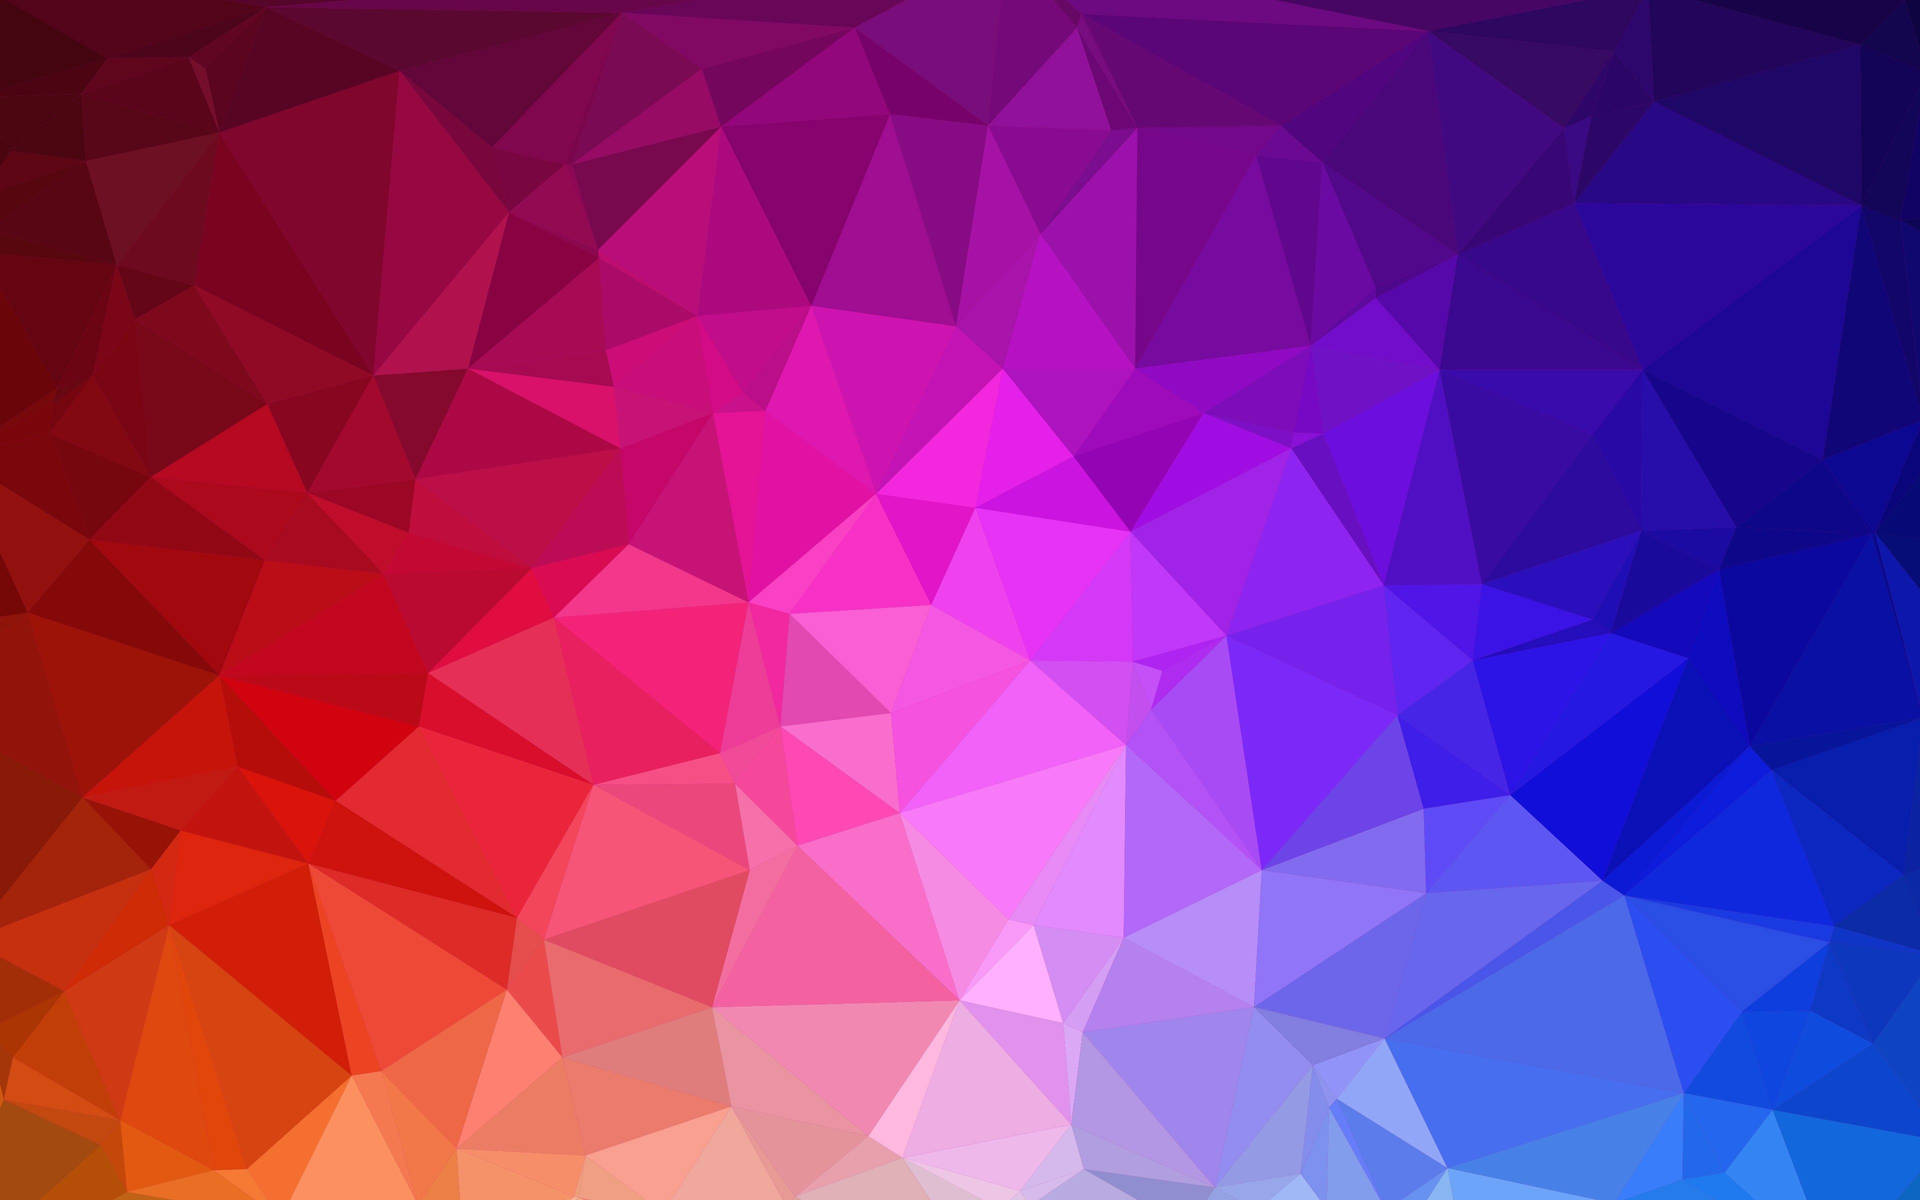 Explore the beauty of abstract imagery with Colorful's unique geometric triangle pattern. Wallpaper